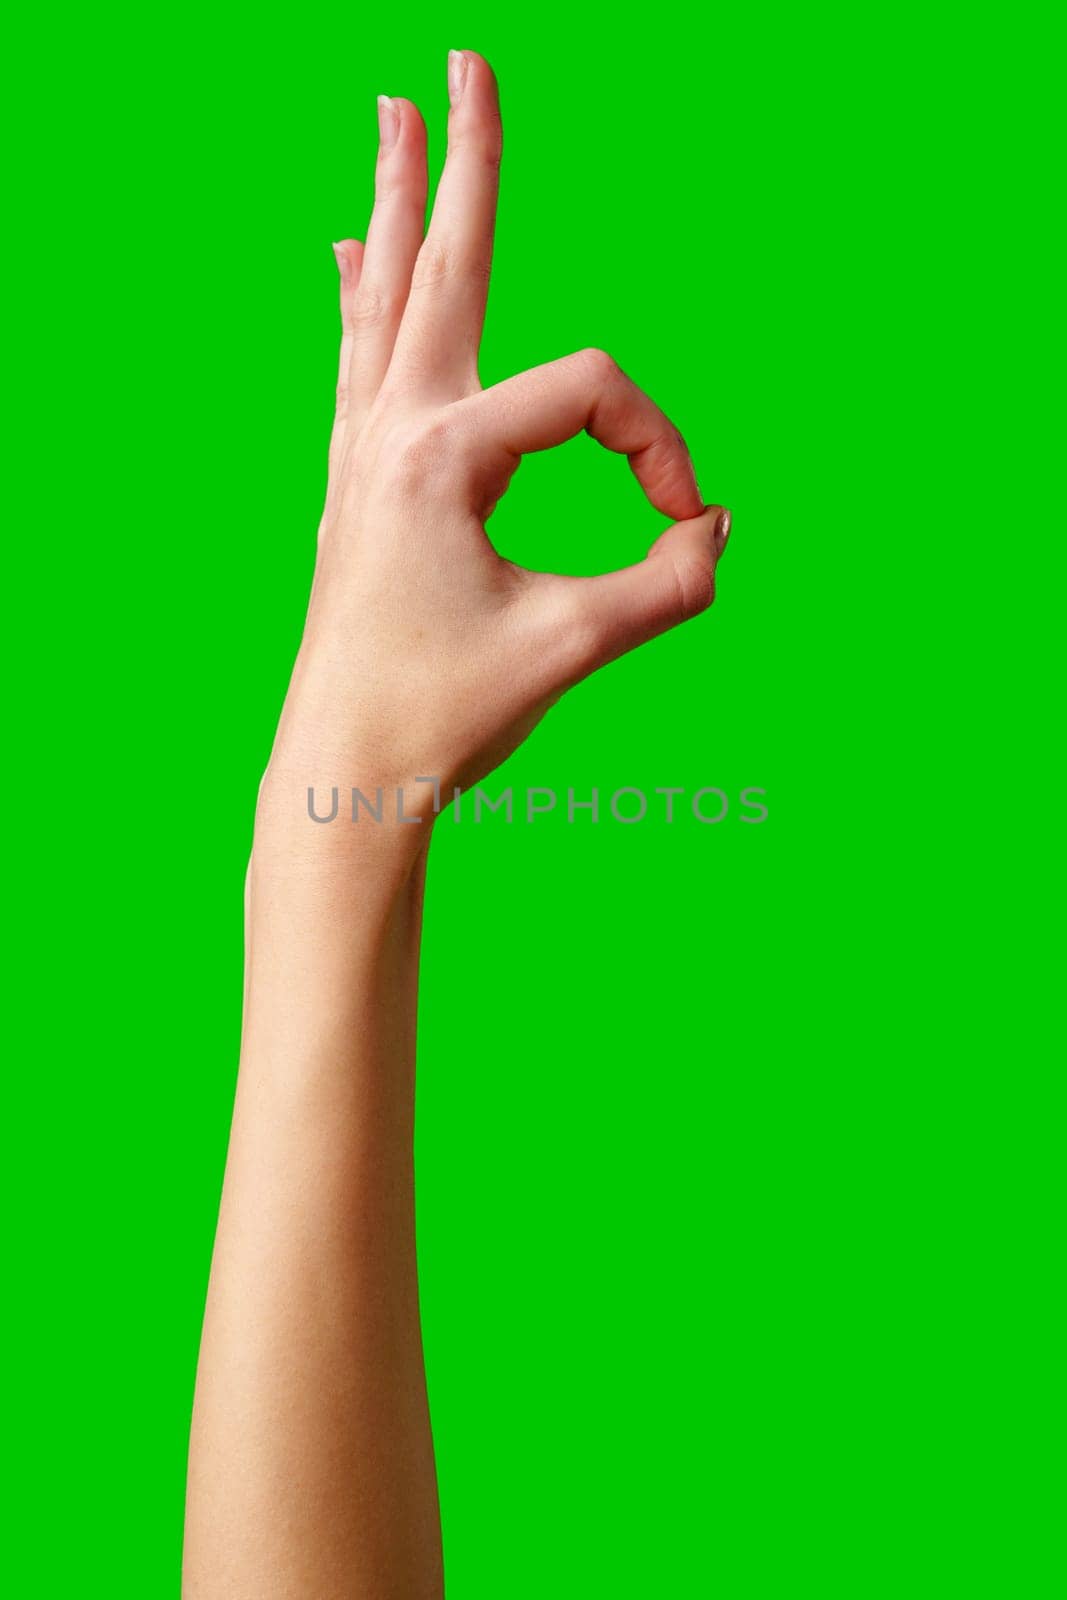 Hand Gesturing Okay Sign Against a Vibrant Green Background by Fabrikasimf